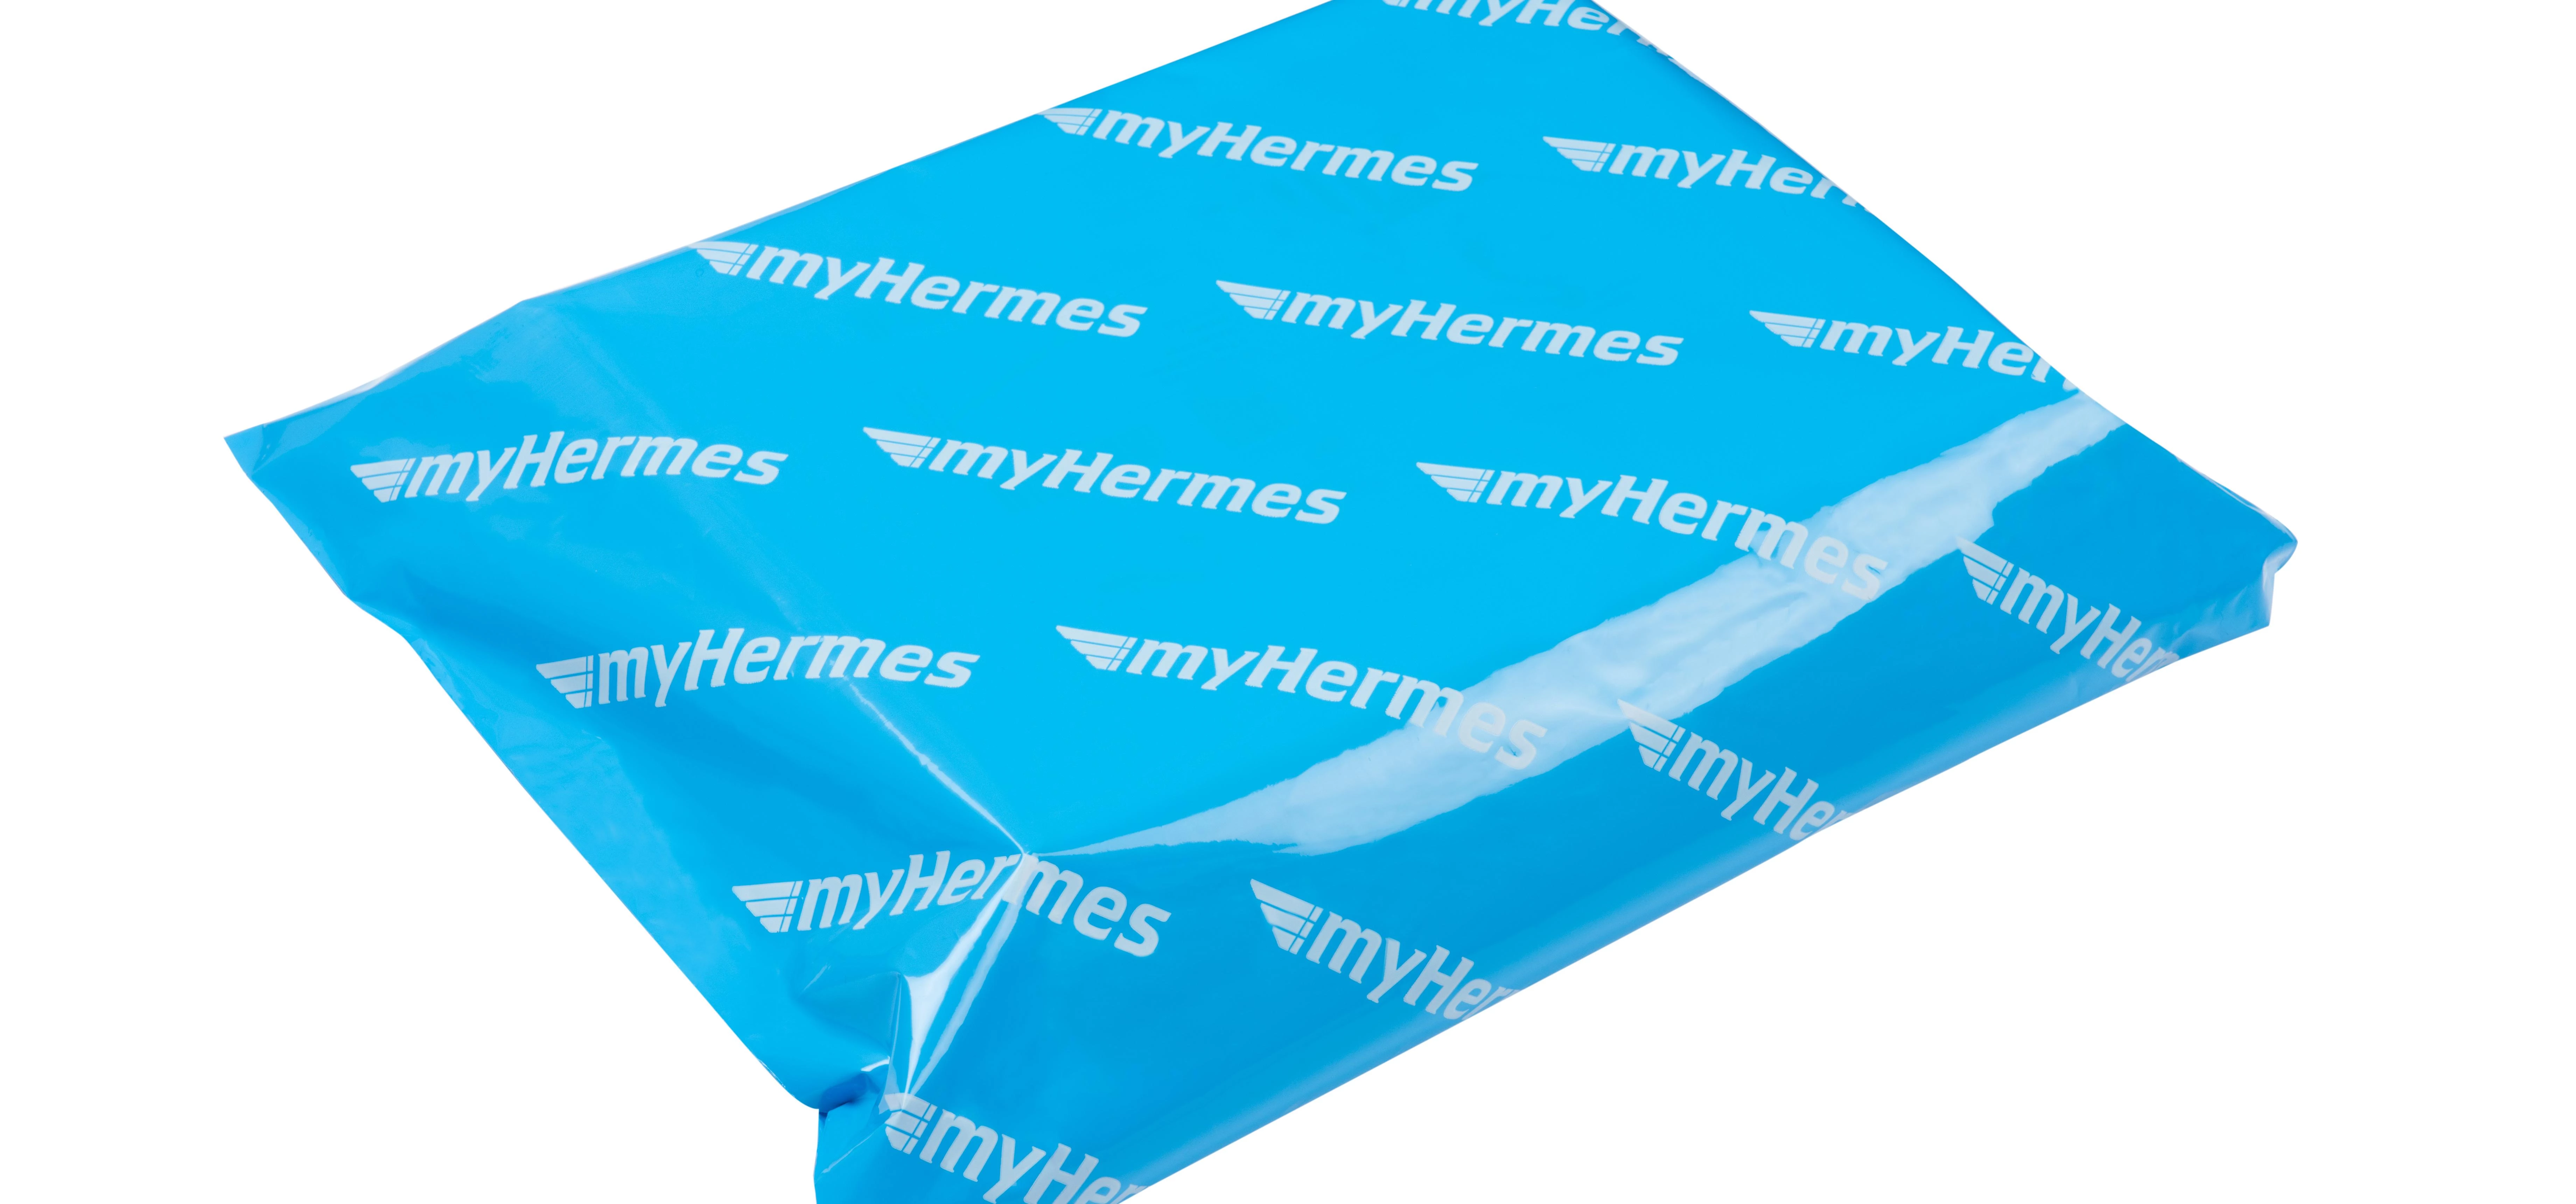 MyHermes bags produced by Duo UK 